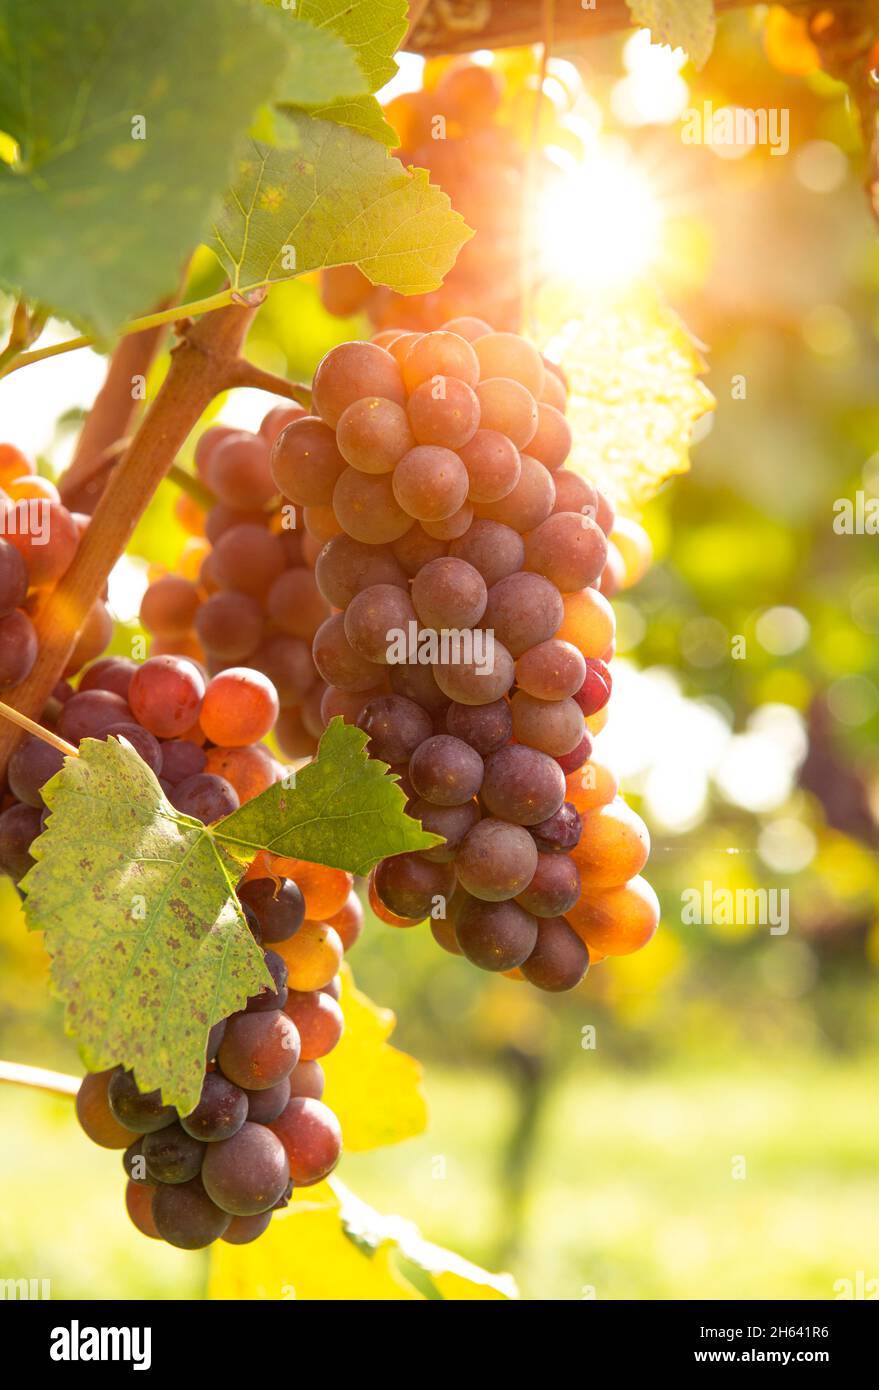 ripe grapes on the vine in the back light Stock Photo